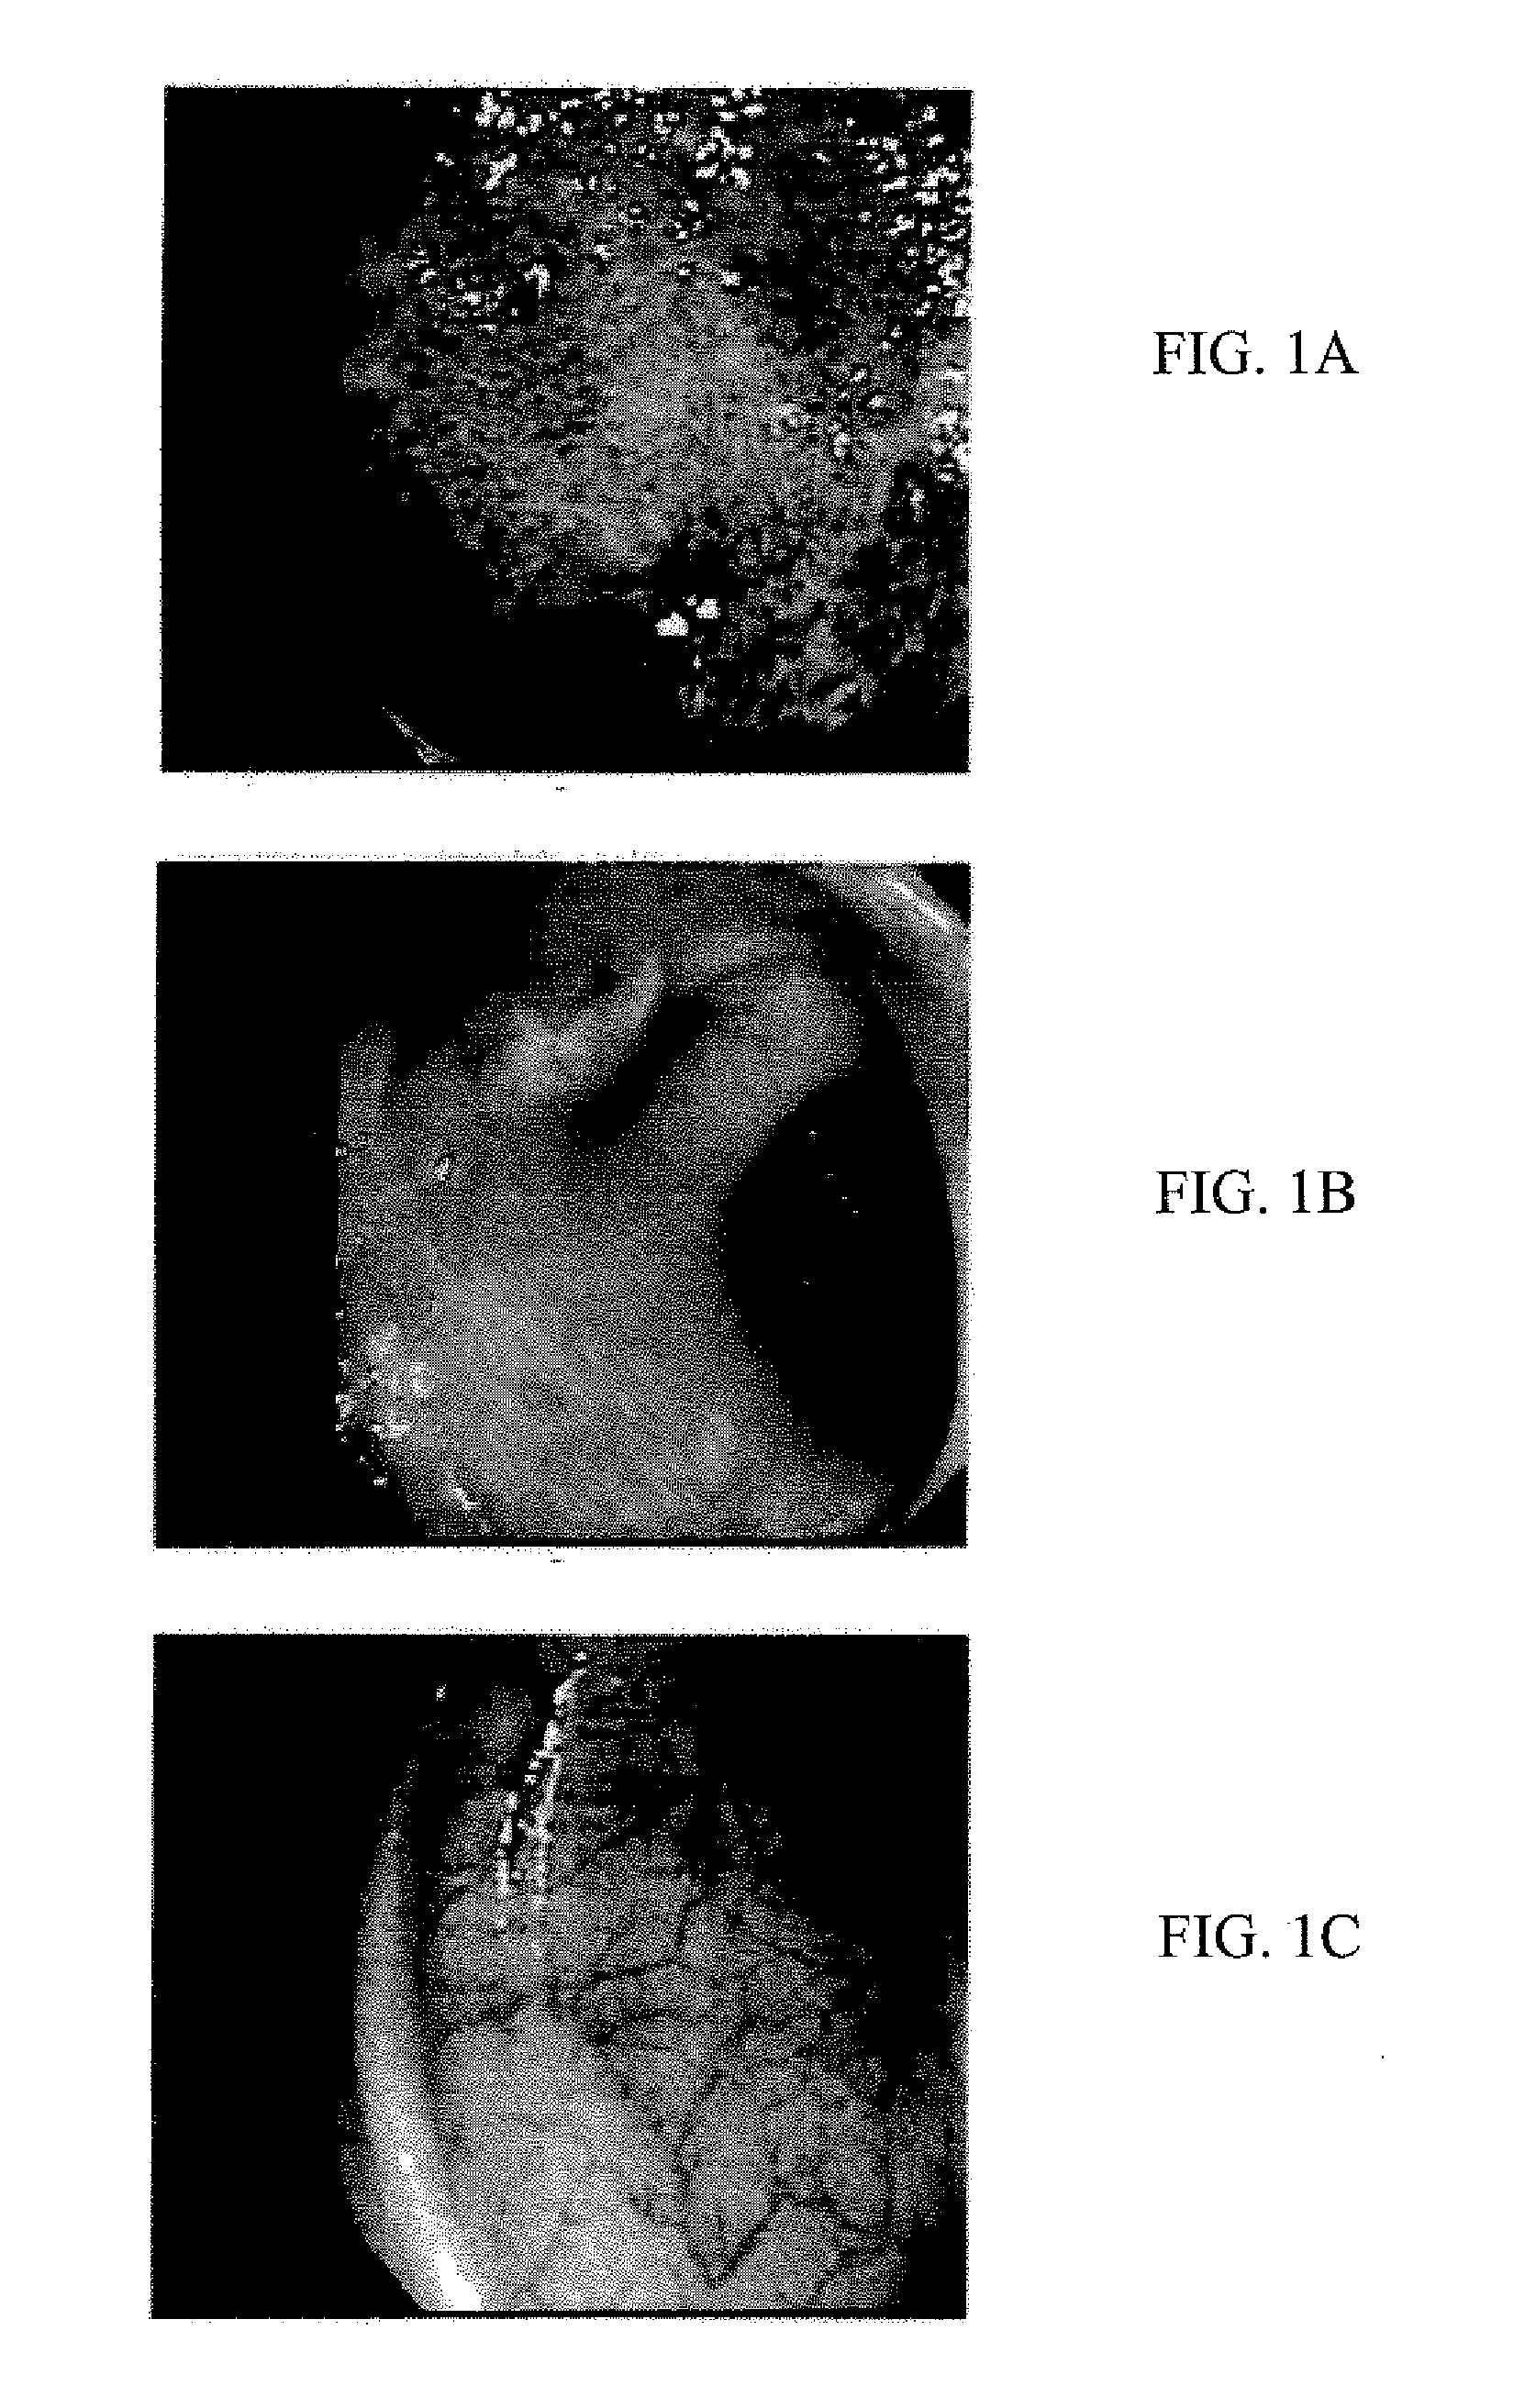 Materials and methods for treatment and diagnosis of disorders associated with oxidative stress